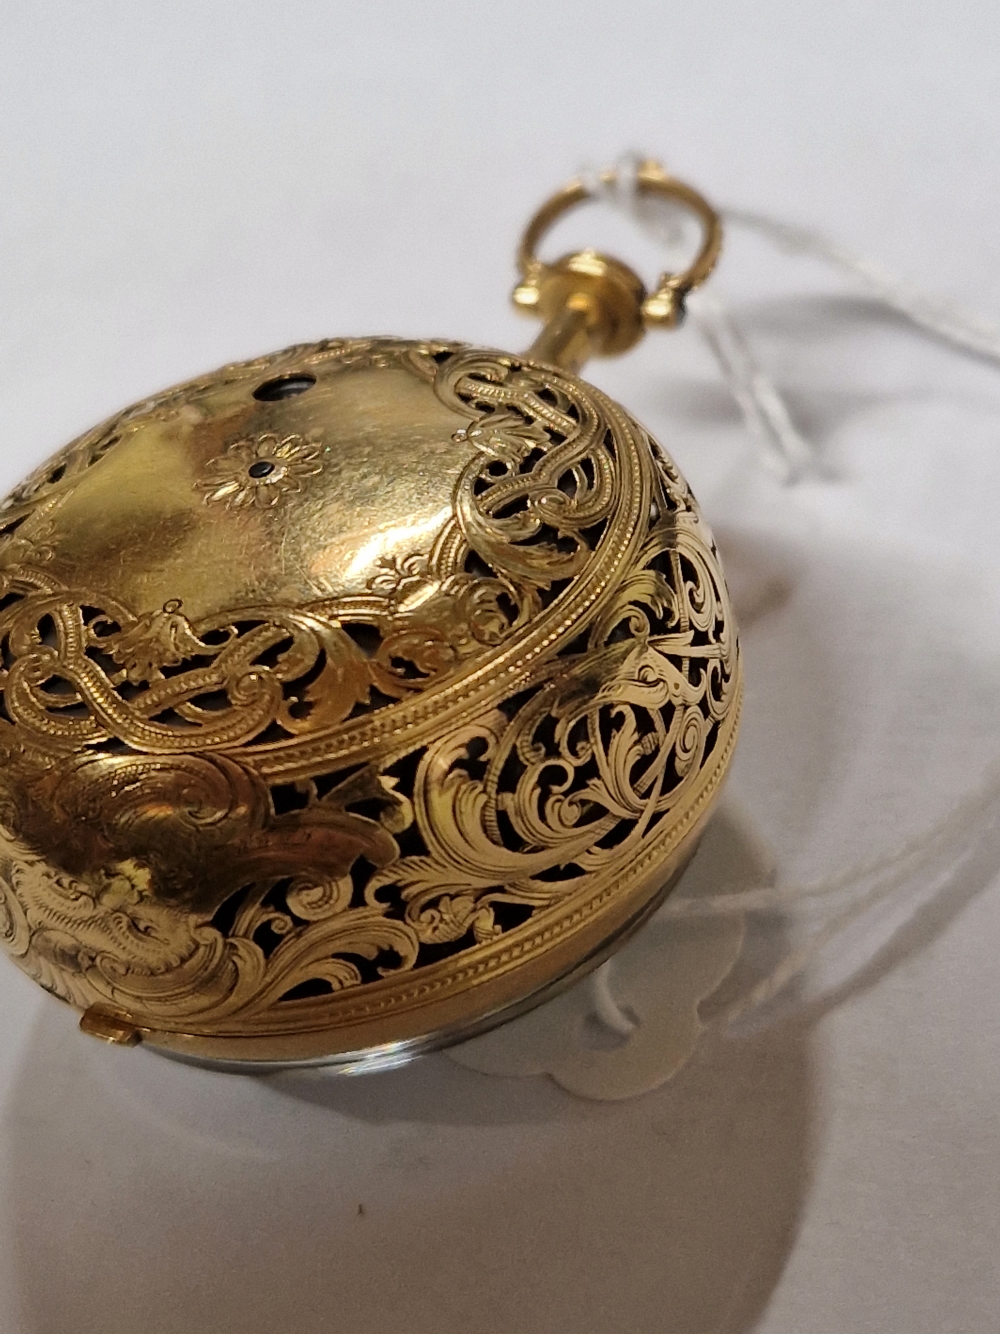 AN ANTIQUE GOLD PAIR CASED POCKET WATCH, SIGNED BONLY LONDON, (SIC) PROBABLY DEVERAUX BOWLEY, - Image 21 of 21